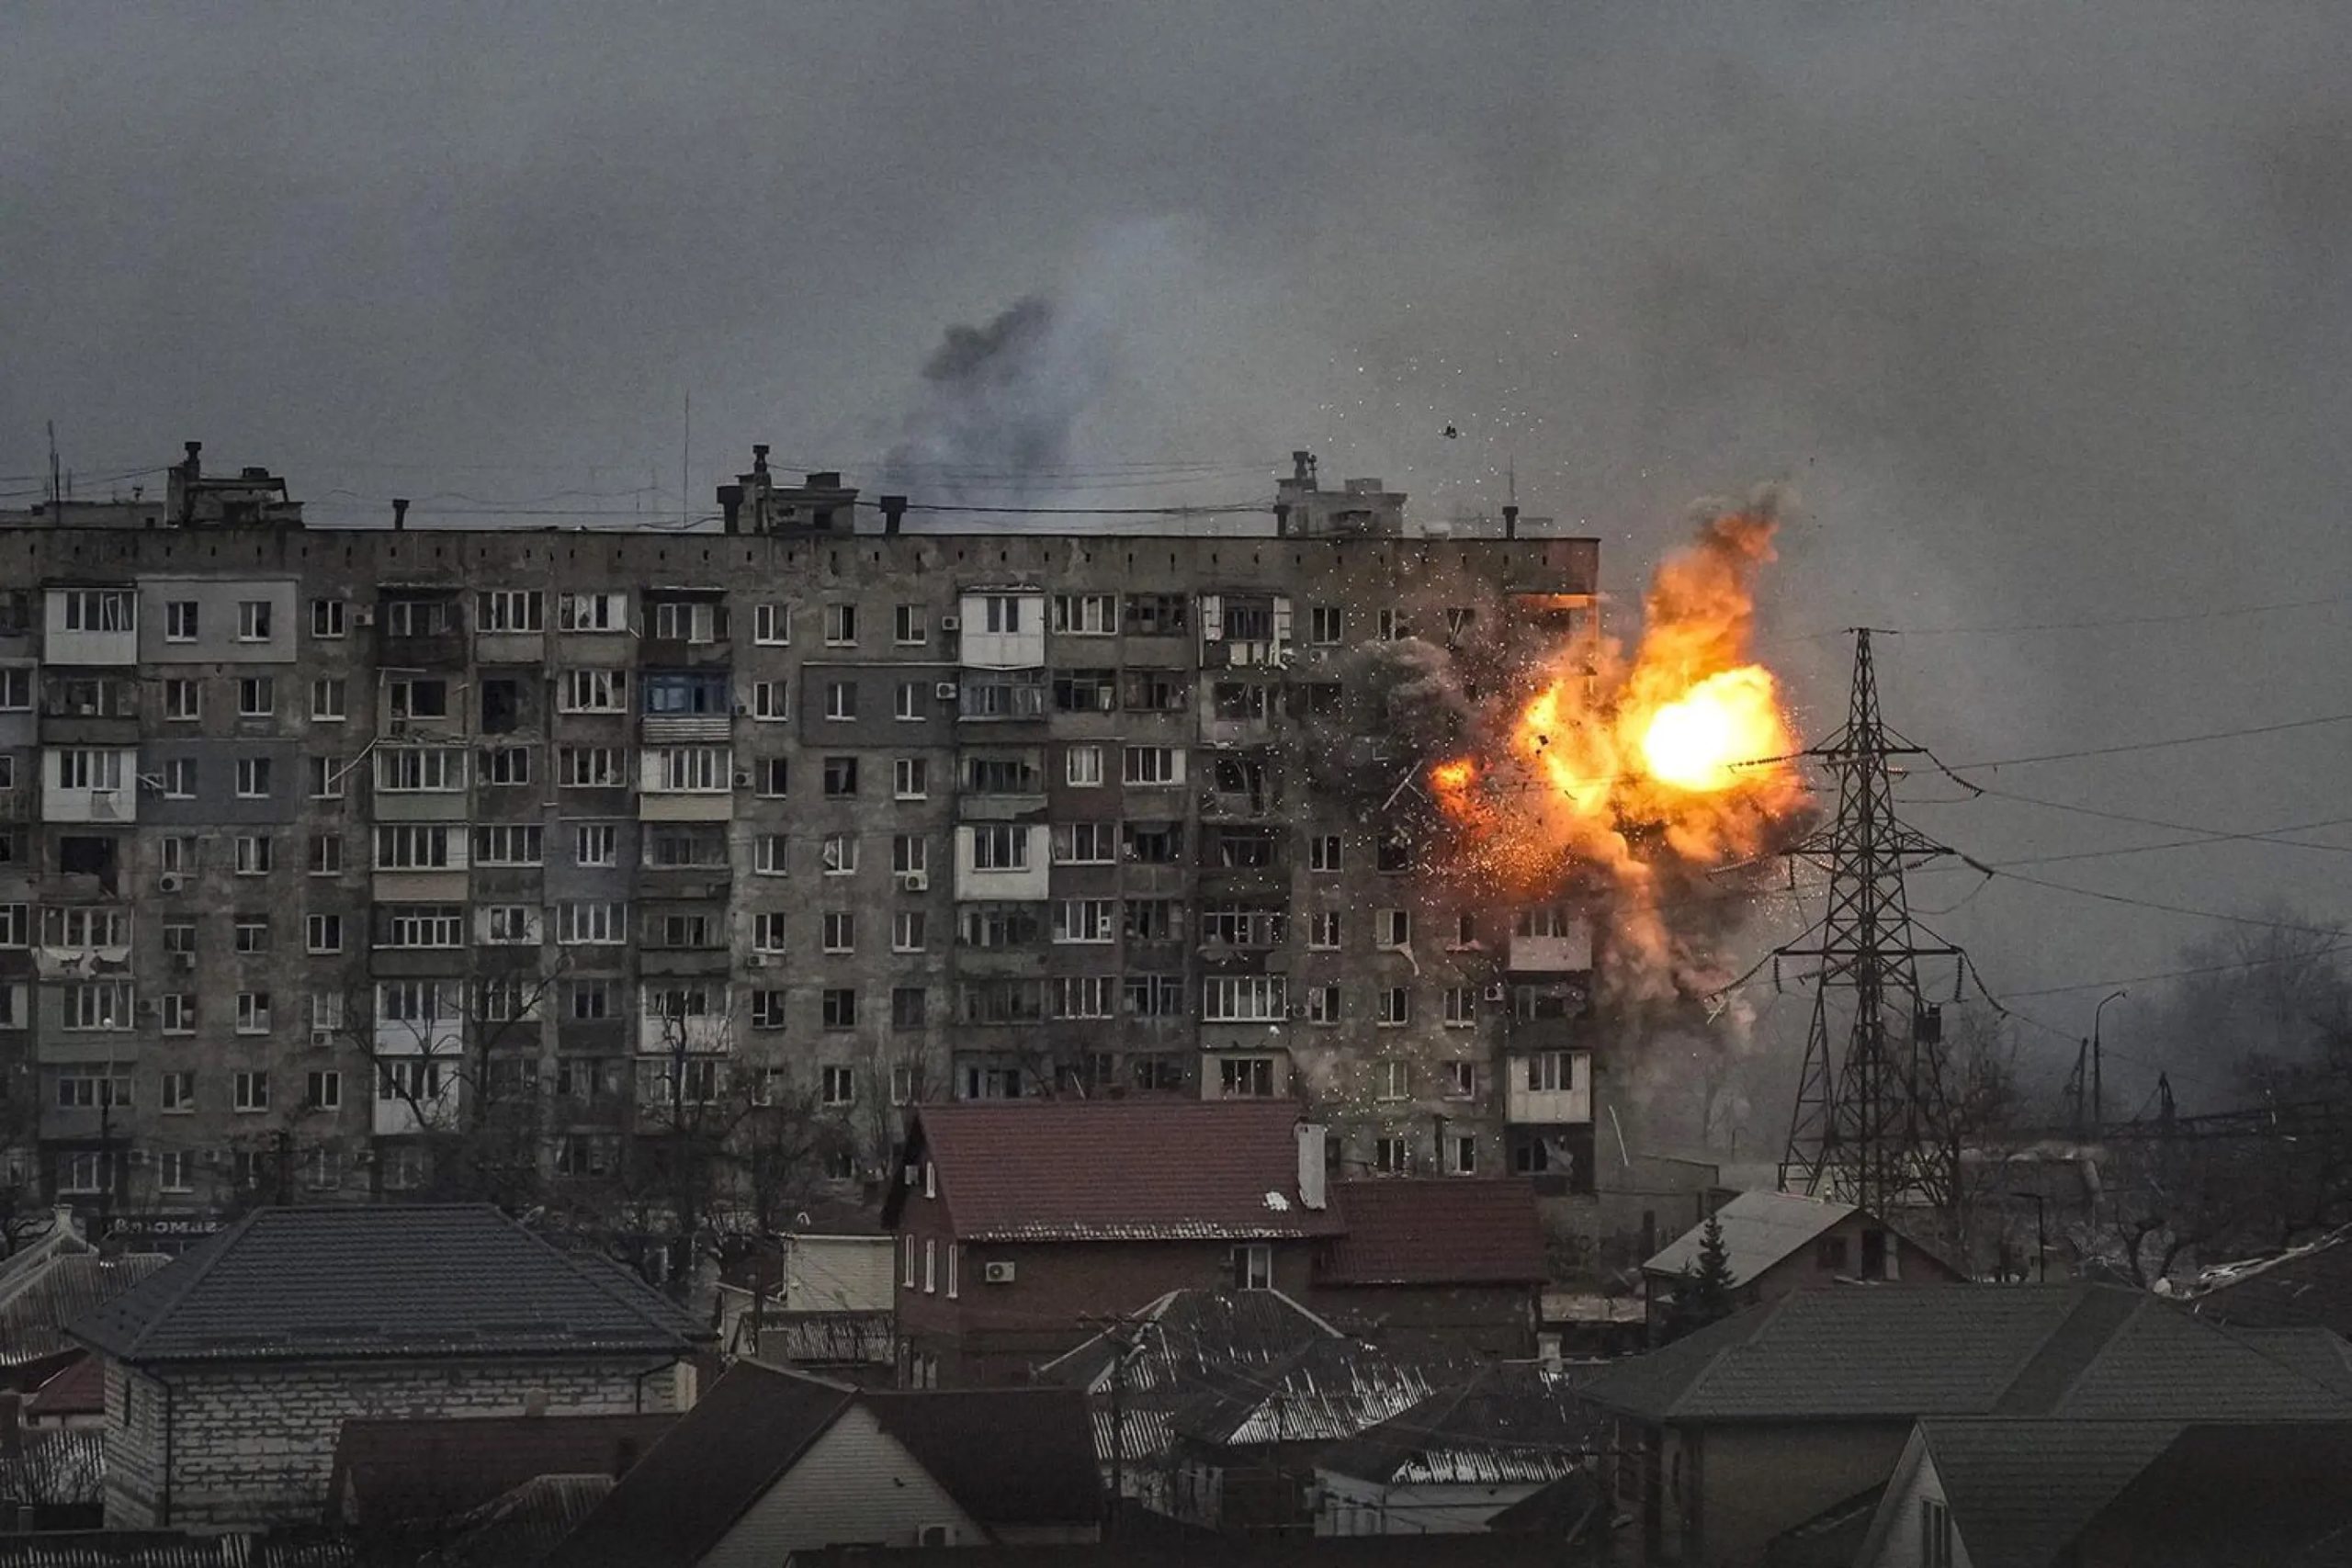 An apartment building explodes after Russian army tank fire in Mariupol, Ukraine, March 11, 2022. (AP Photo/Evgeniy Maloletka)